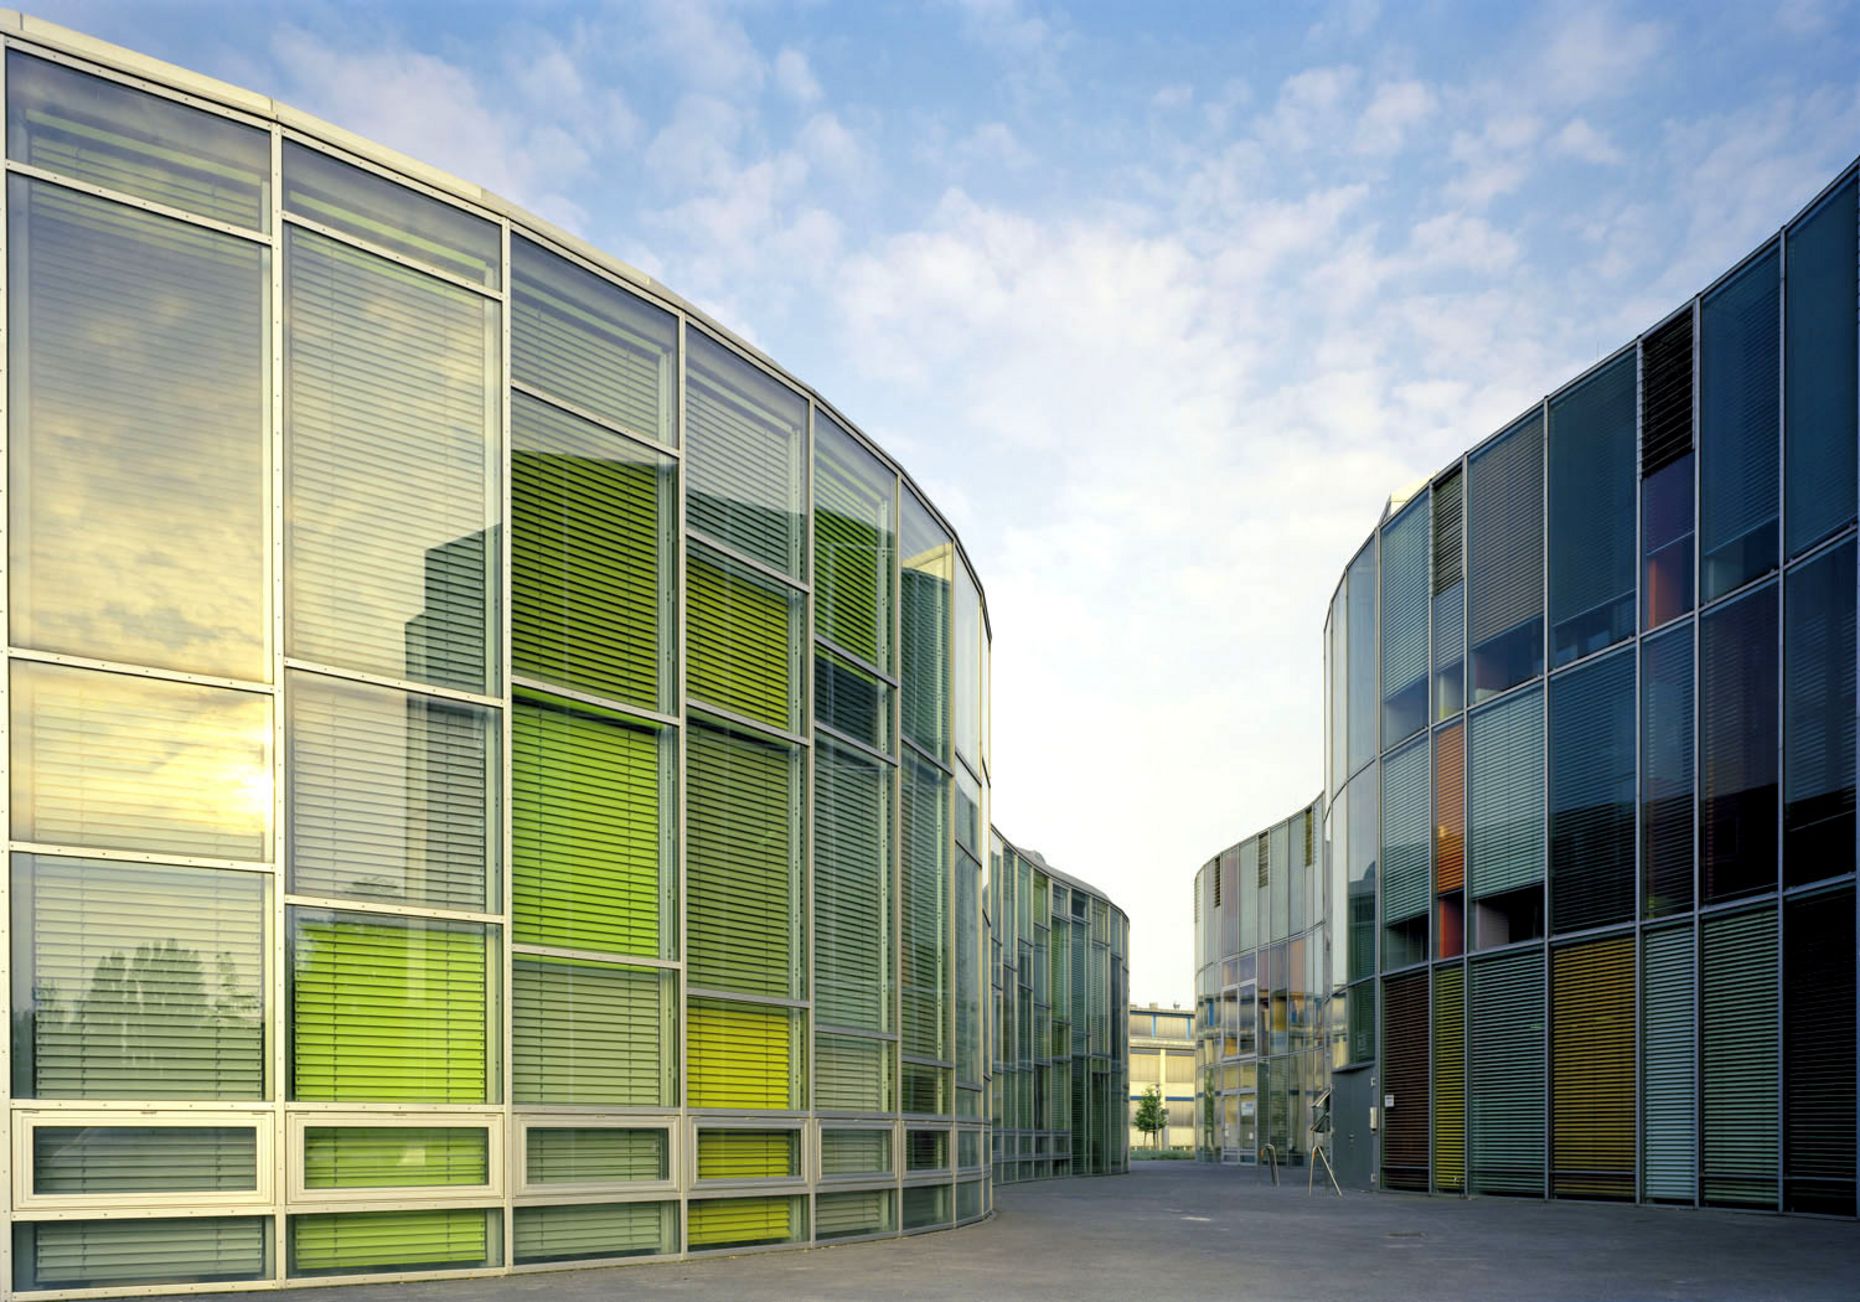 Photography by Sauerbruch Hutton Architects, colorprint, 42 x 60 cm